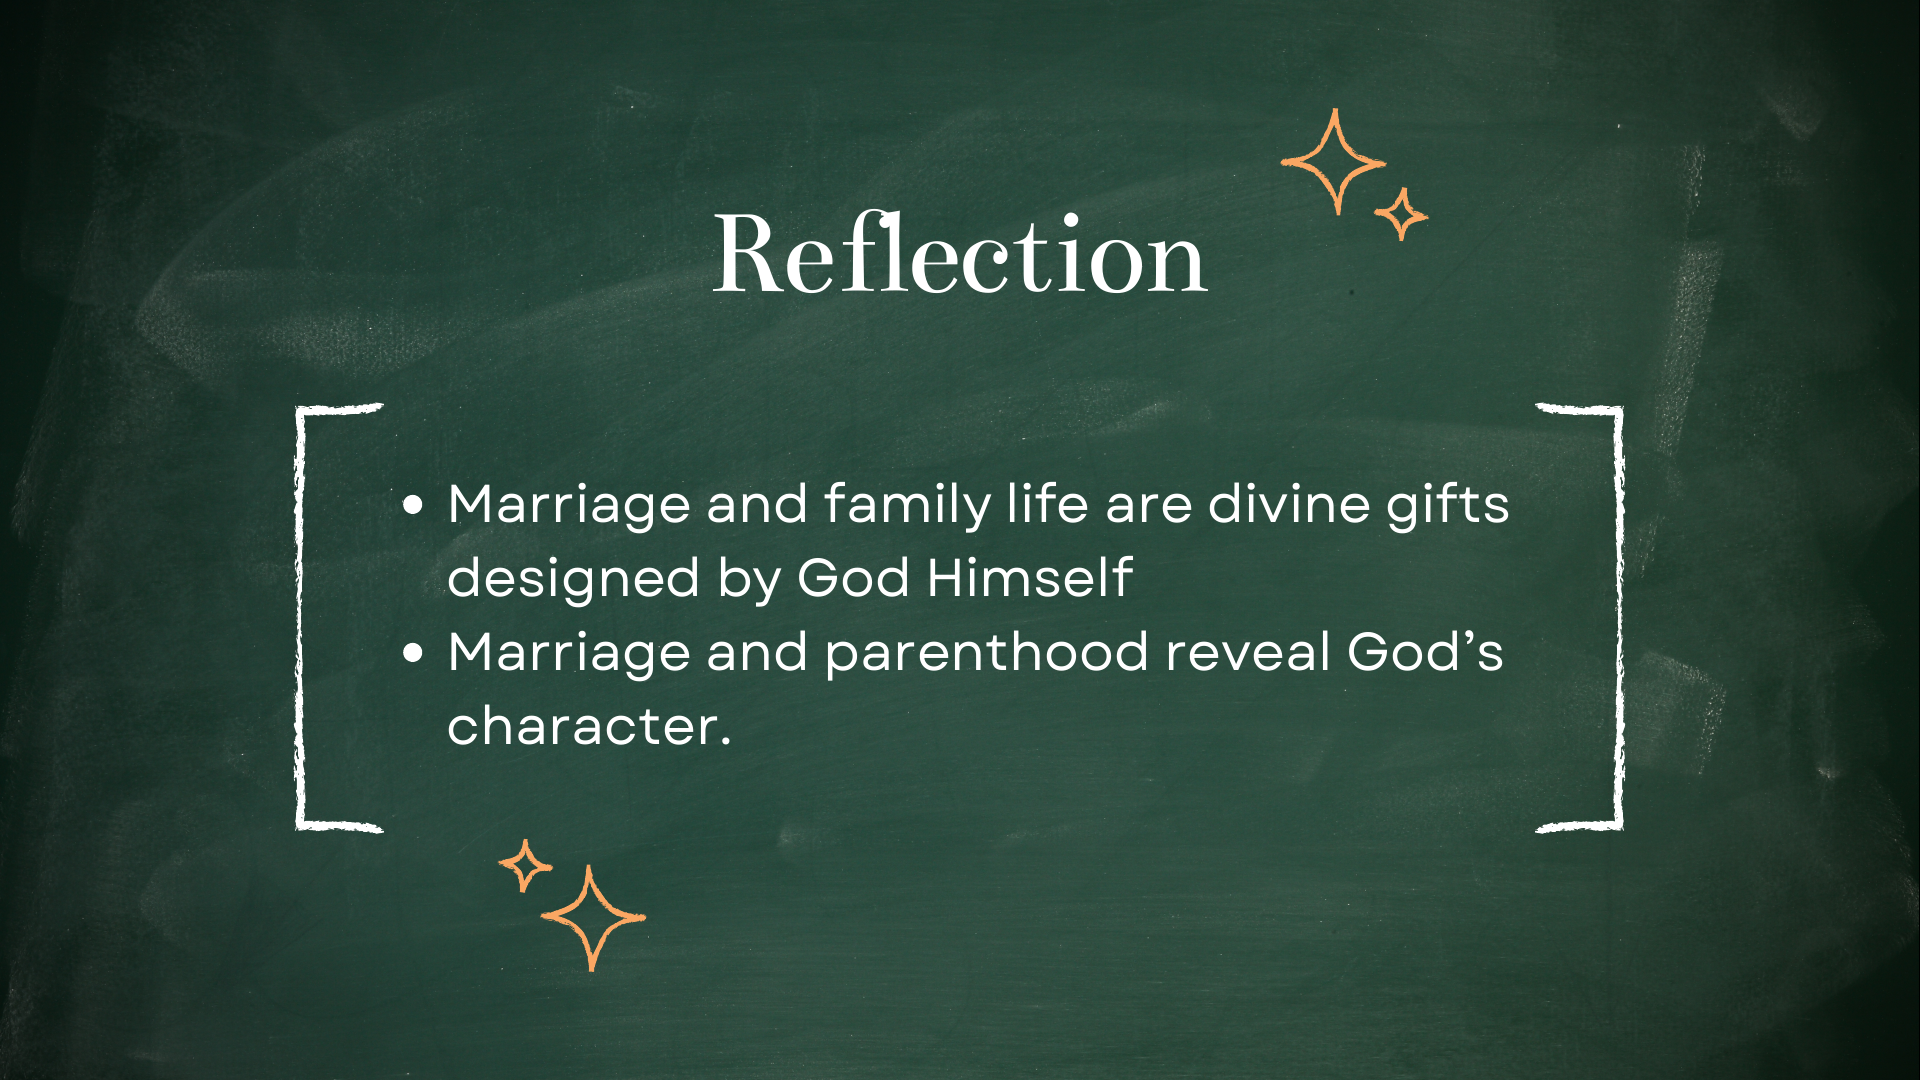 Marriage and family life are divine gifts designed by God Himself. Marriage and parenthood reveal God's character.